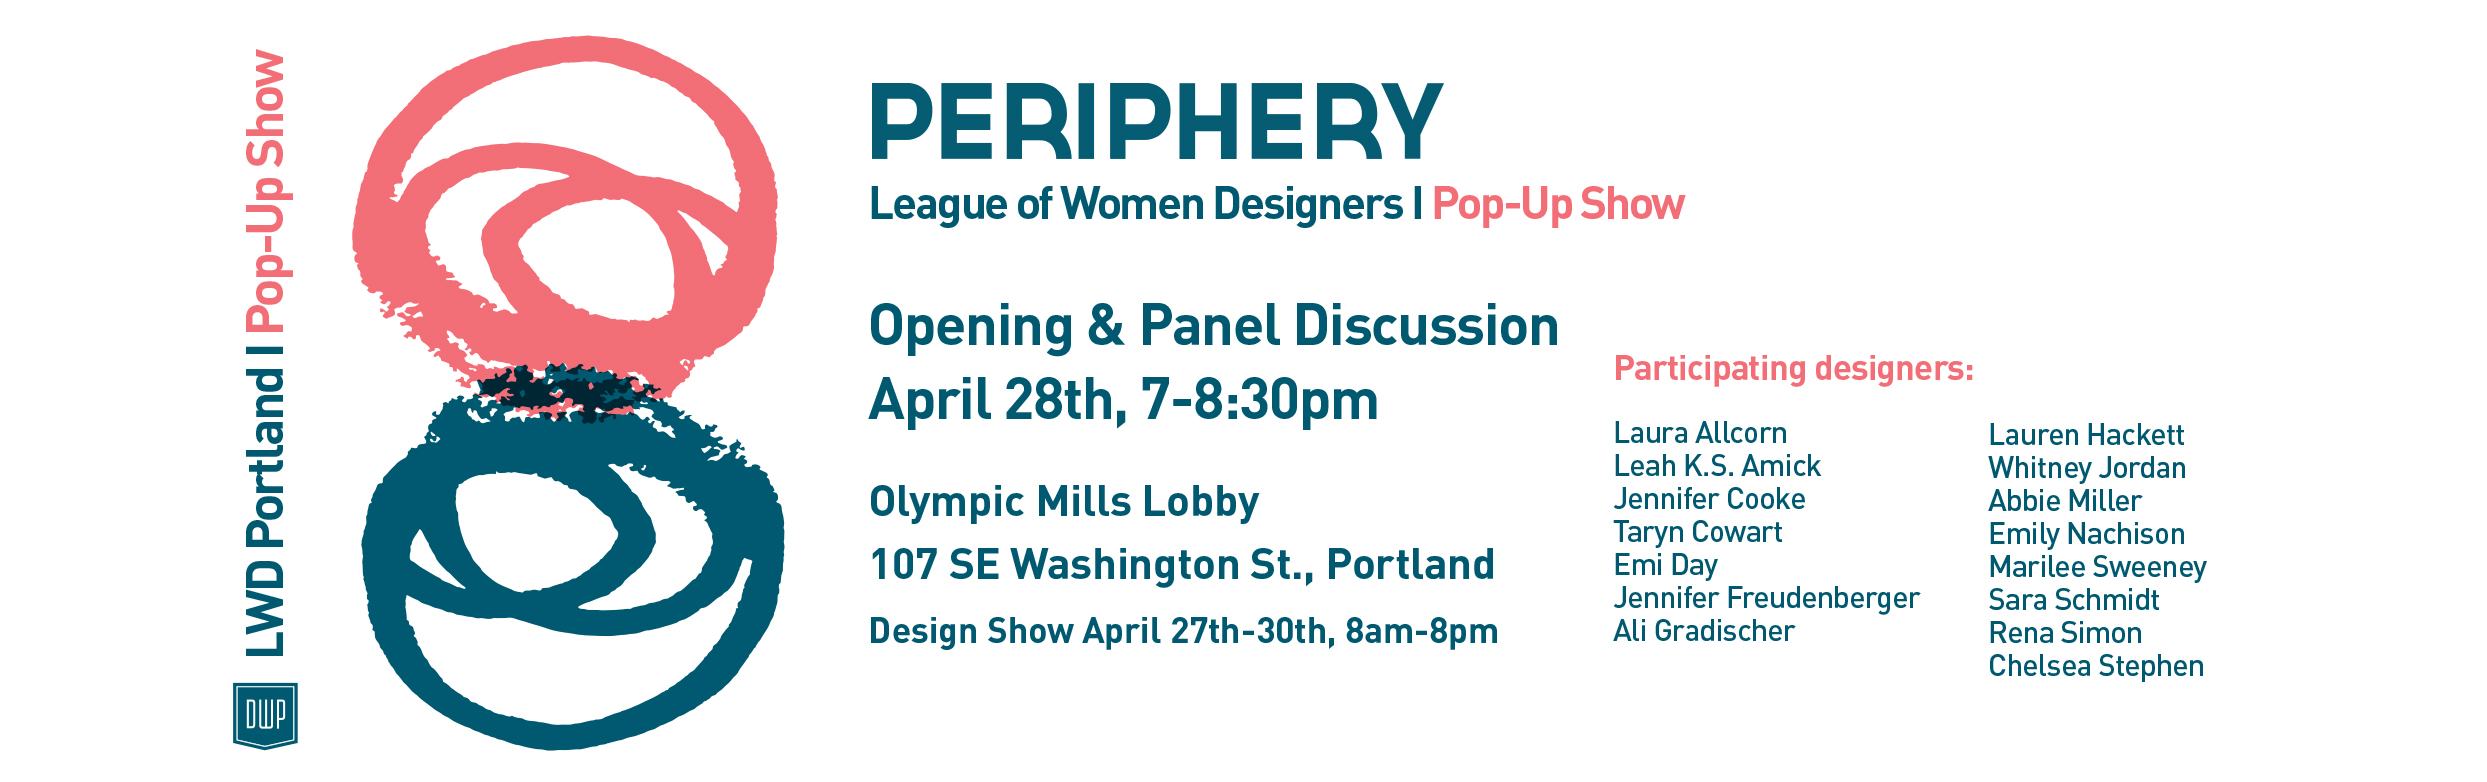 Periphery designers at League of Women Designers Portland's Pop-Up Show